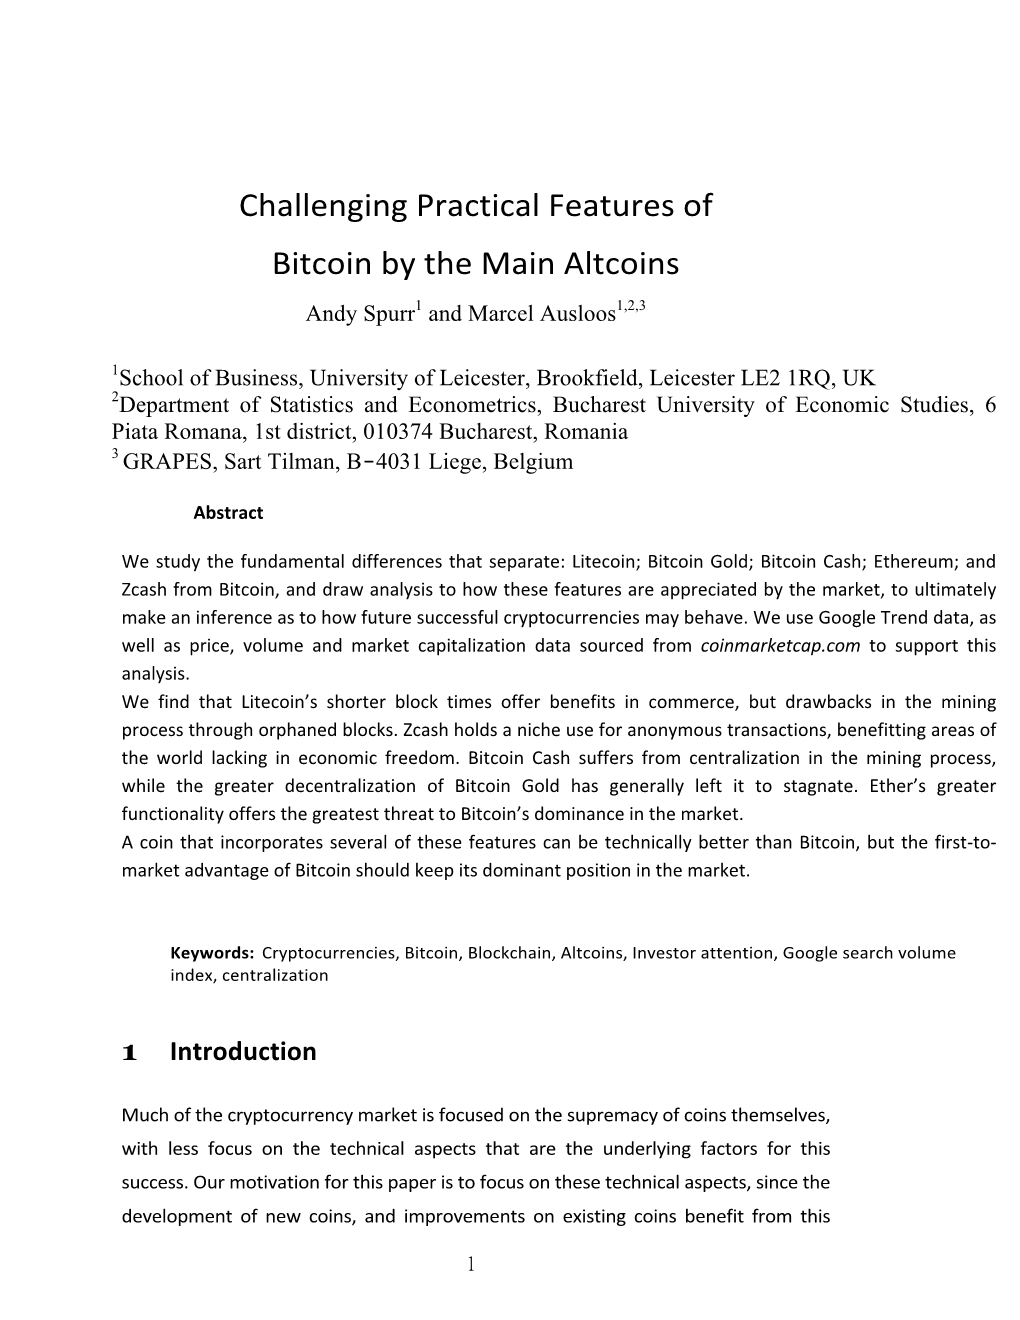 Challenging Practical Features of Bitcoin by the Main Altcoins Andy Spurr1 and Marcel Ausloos1,2,3